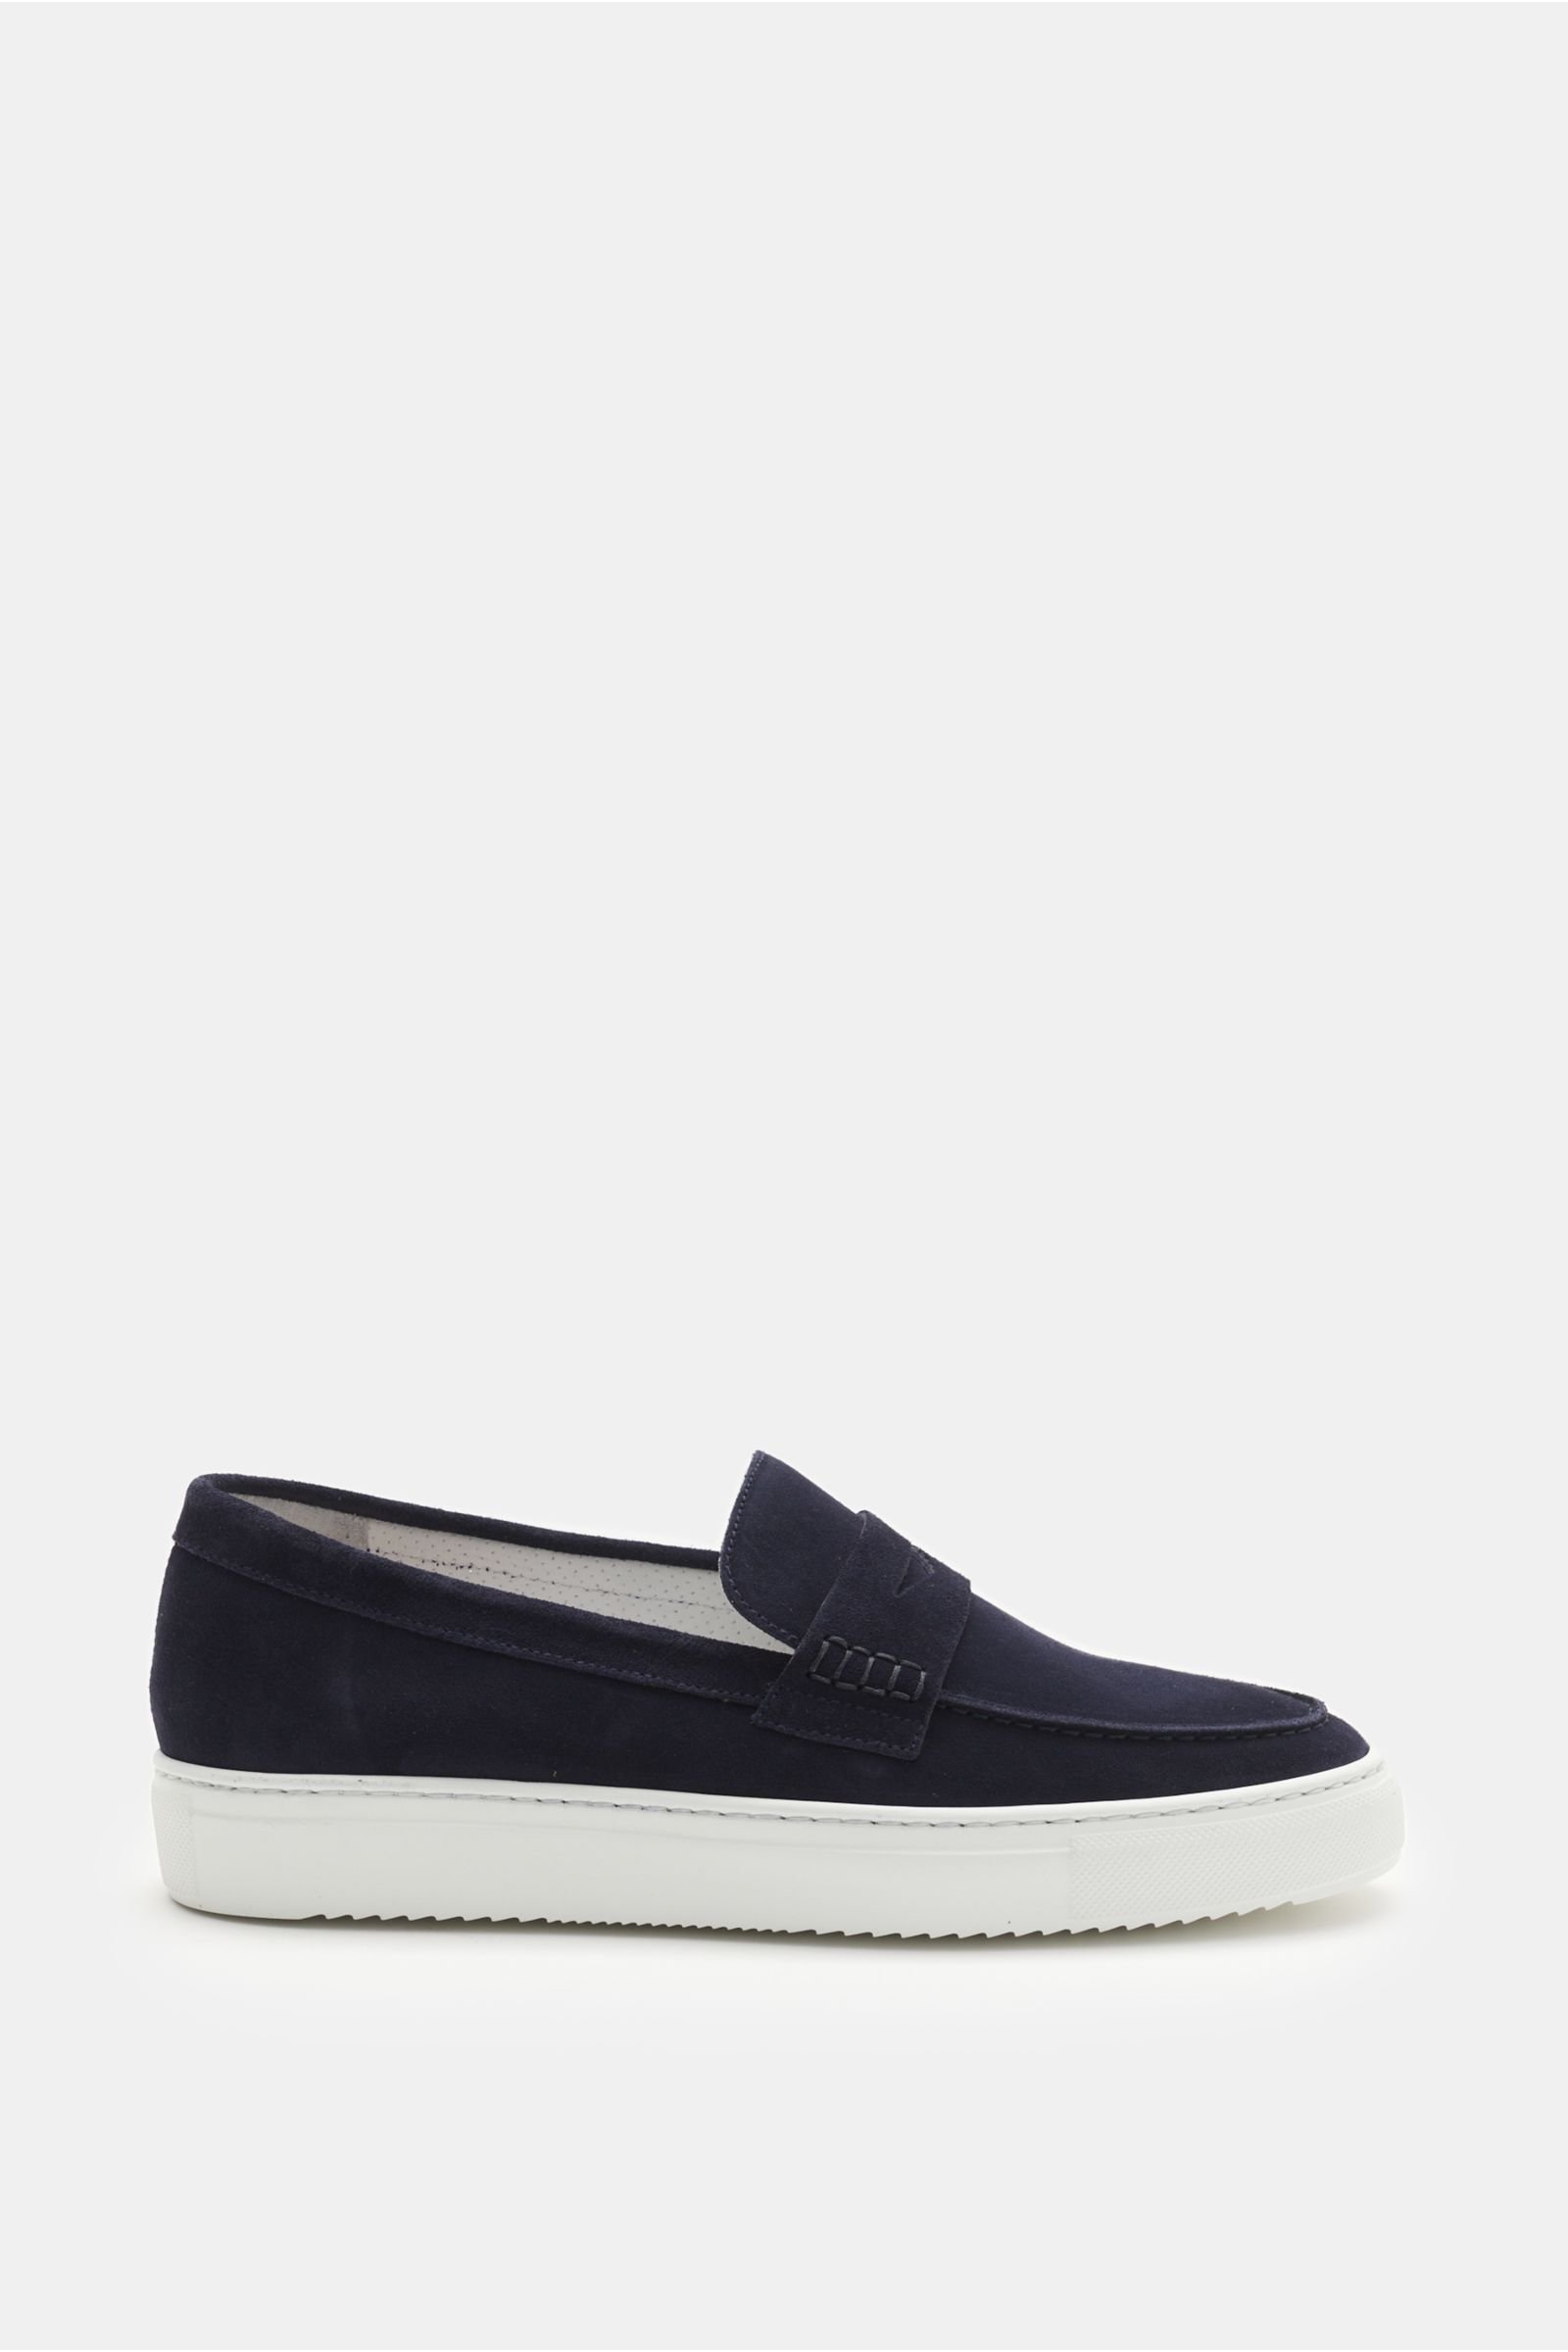 Penny loafers navy